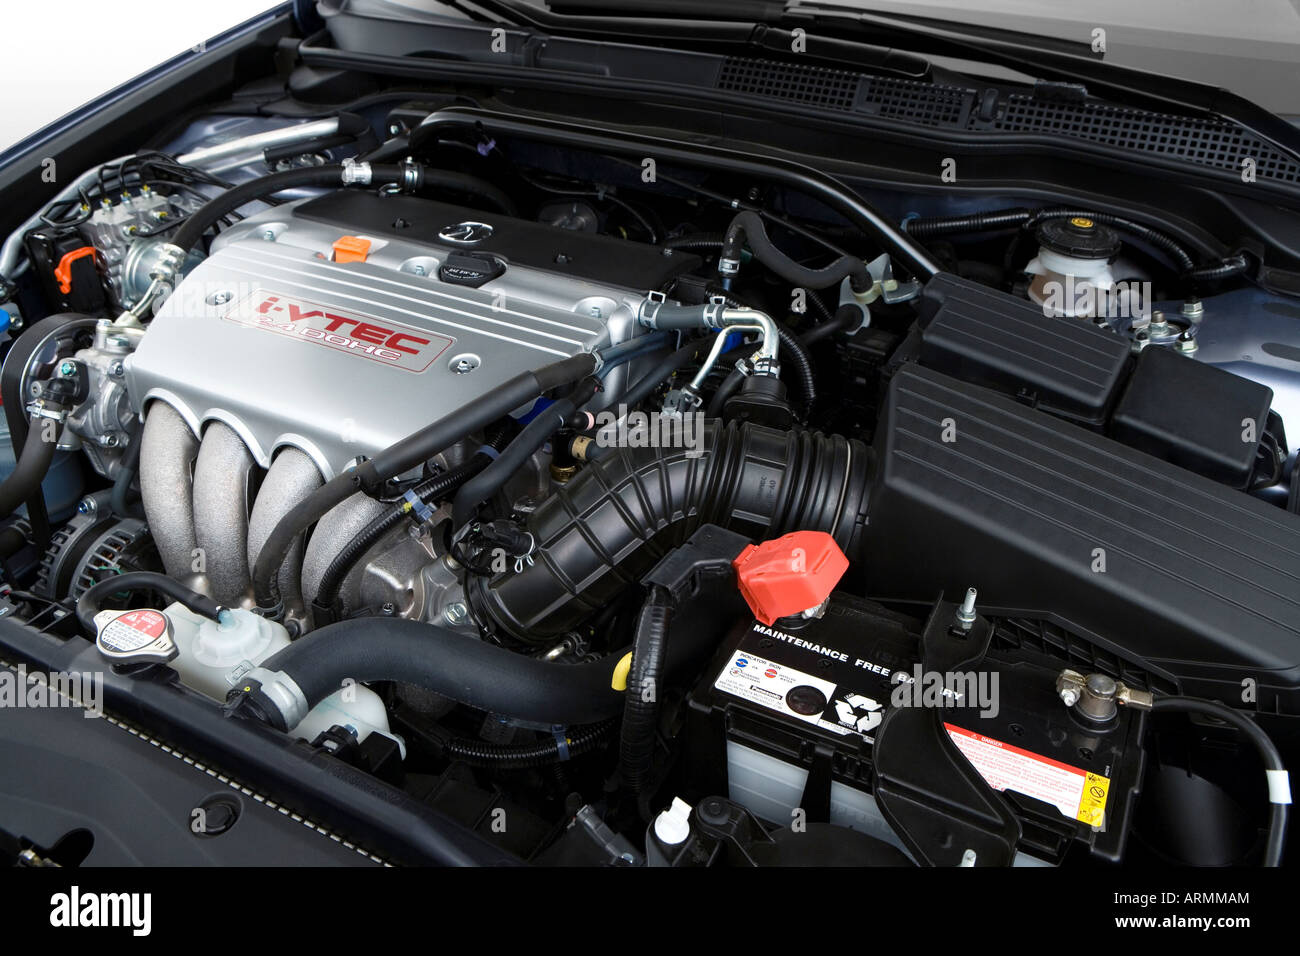 08 Acura Tsx In Blue Engine Stock Photo Alamy